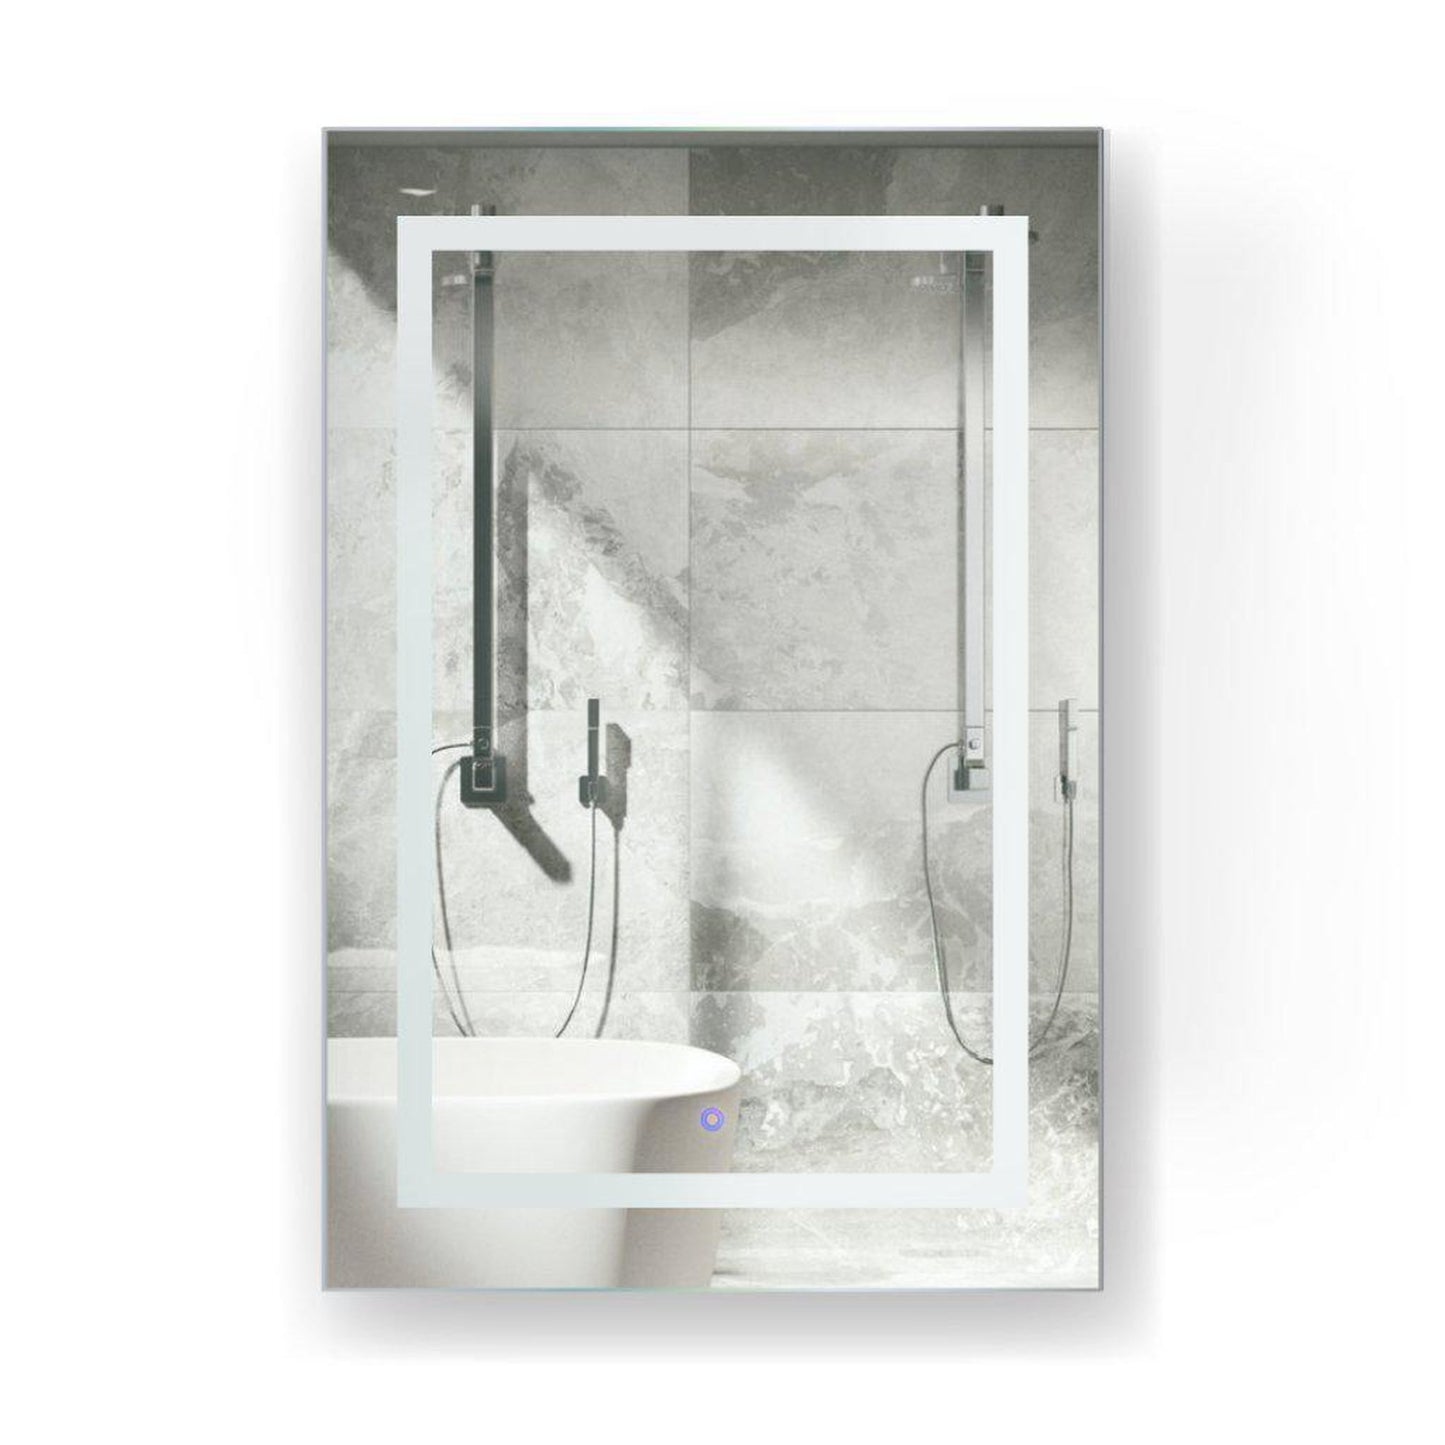 Krugg Reflections Svange 24" x 36" 5000K Single Left Opening Rectangular Recessed/Surface-Mount Illuminated Silver Backed LED Medicine Cabinet Mirror With Built-in Defogger, Dimmer and Electrical Outlet